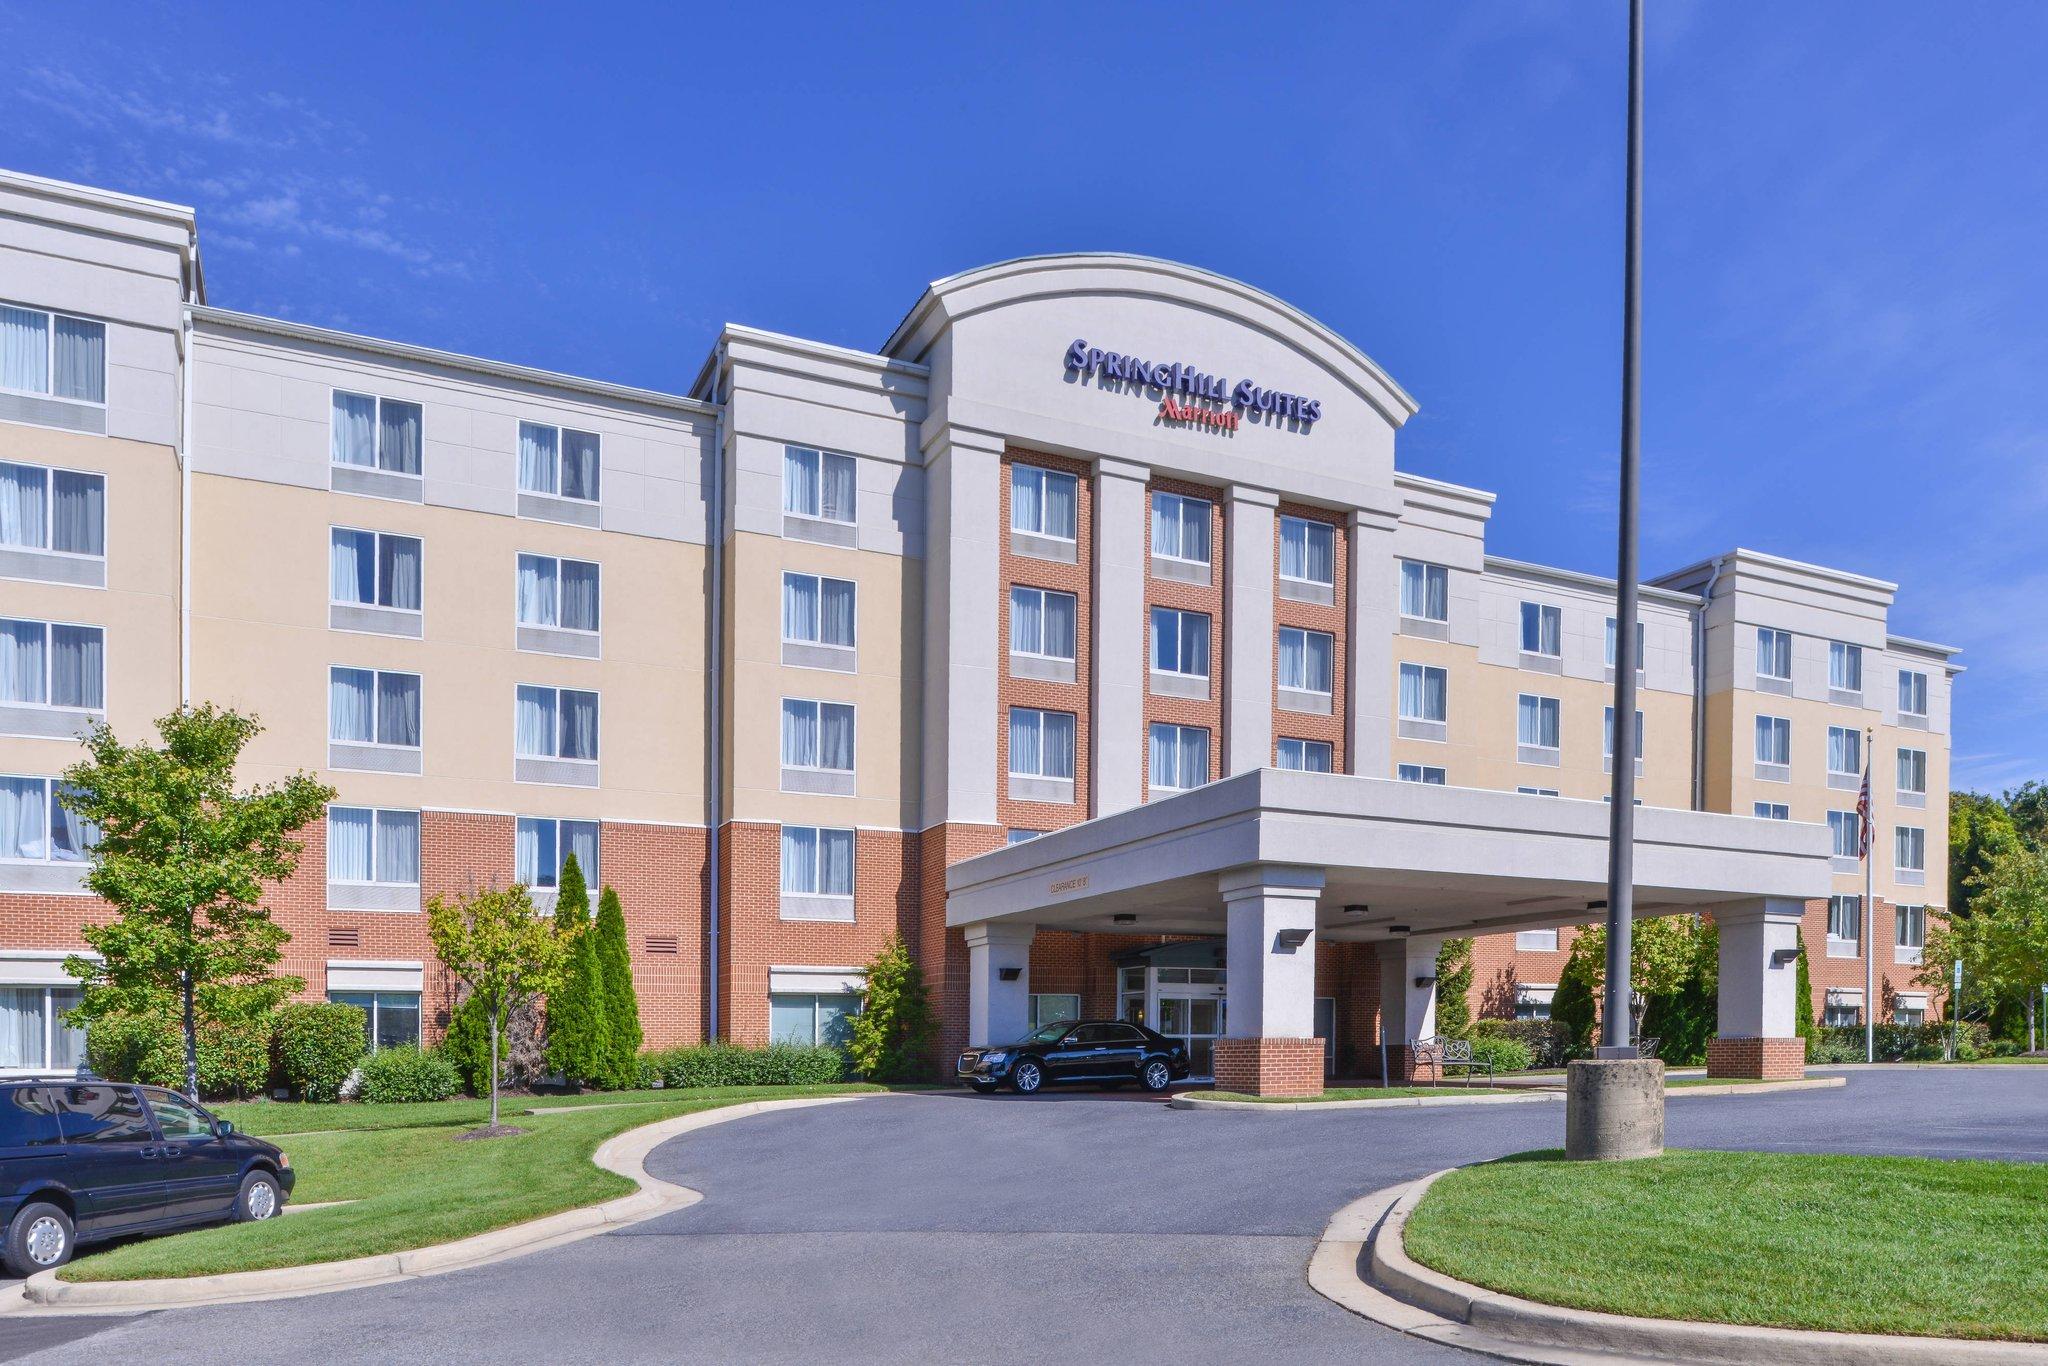 SpringHill Suites Arundel Mills BWI Airport in Hanover, MD